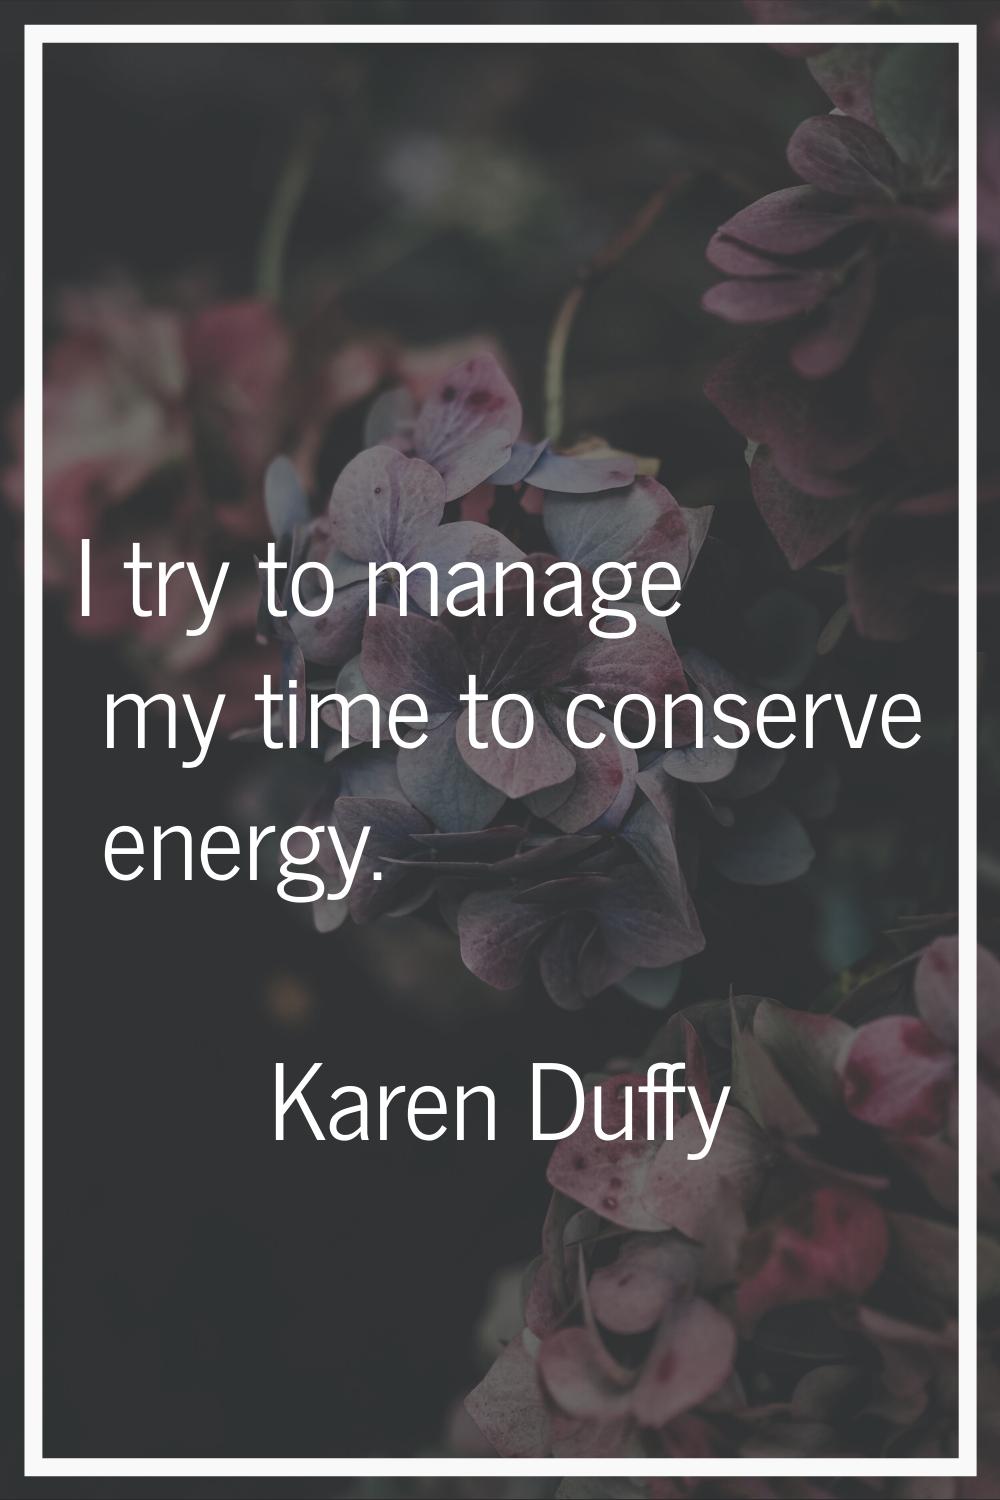 I try to manage my time to conserve energy.